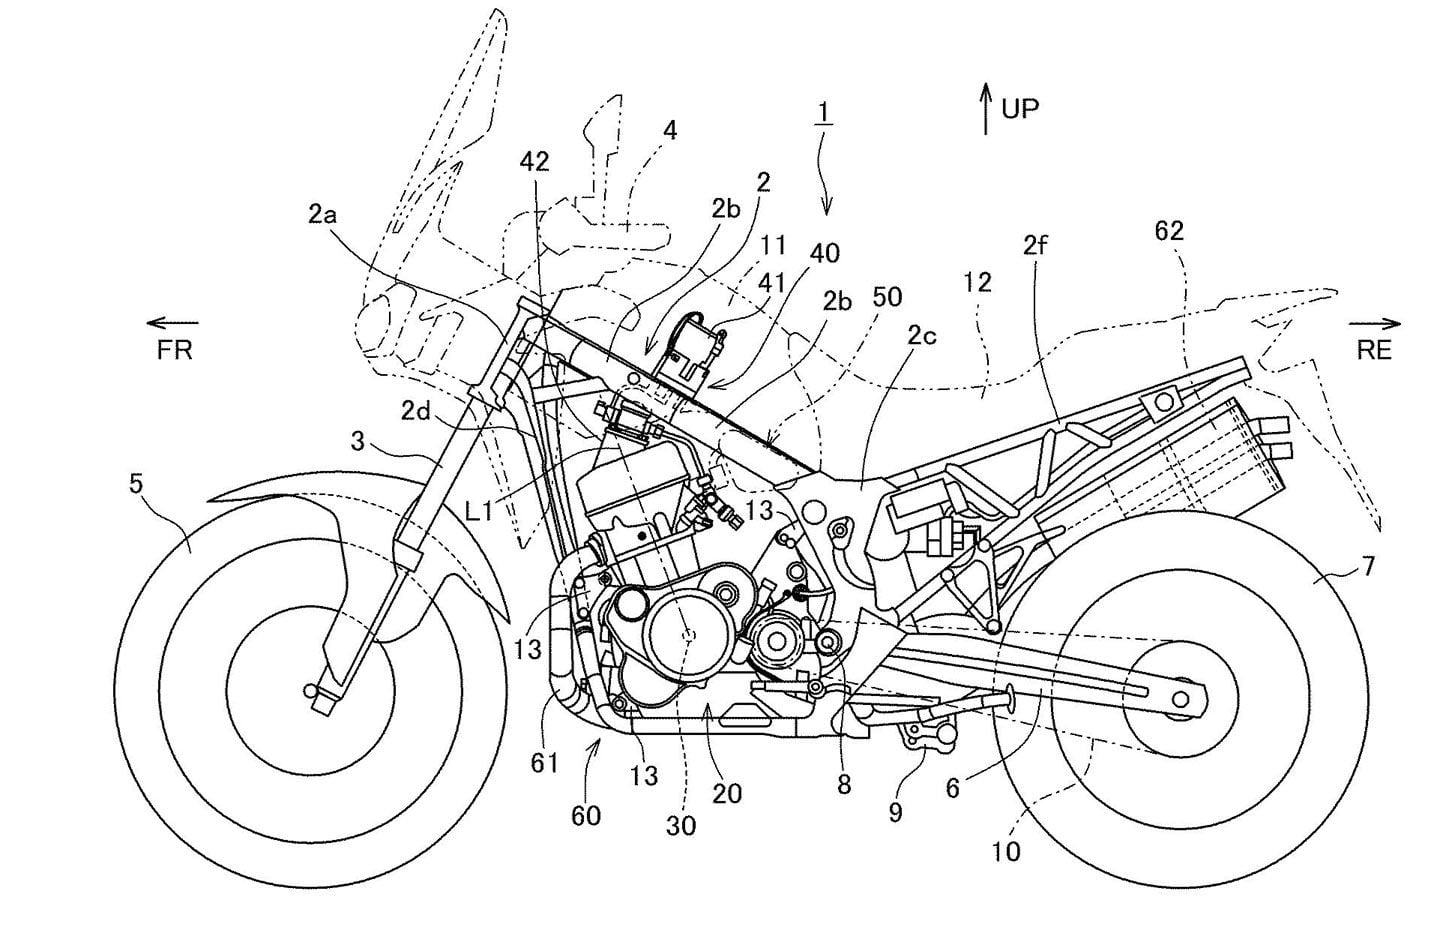 Patents show that Honda is looking at direct injection on the new Africa Twin, which is more likely to find its way onto the bike than the supercharger.